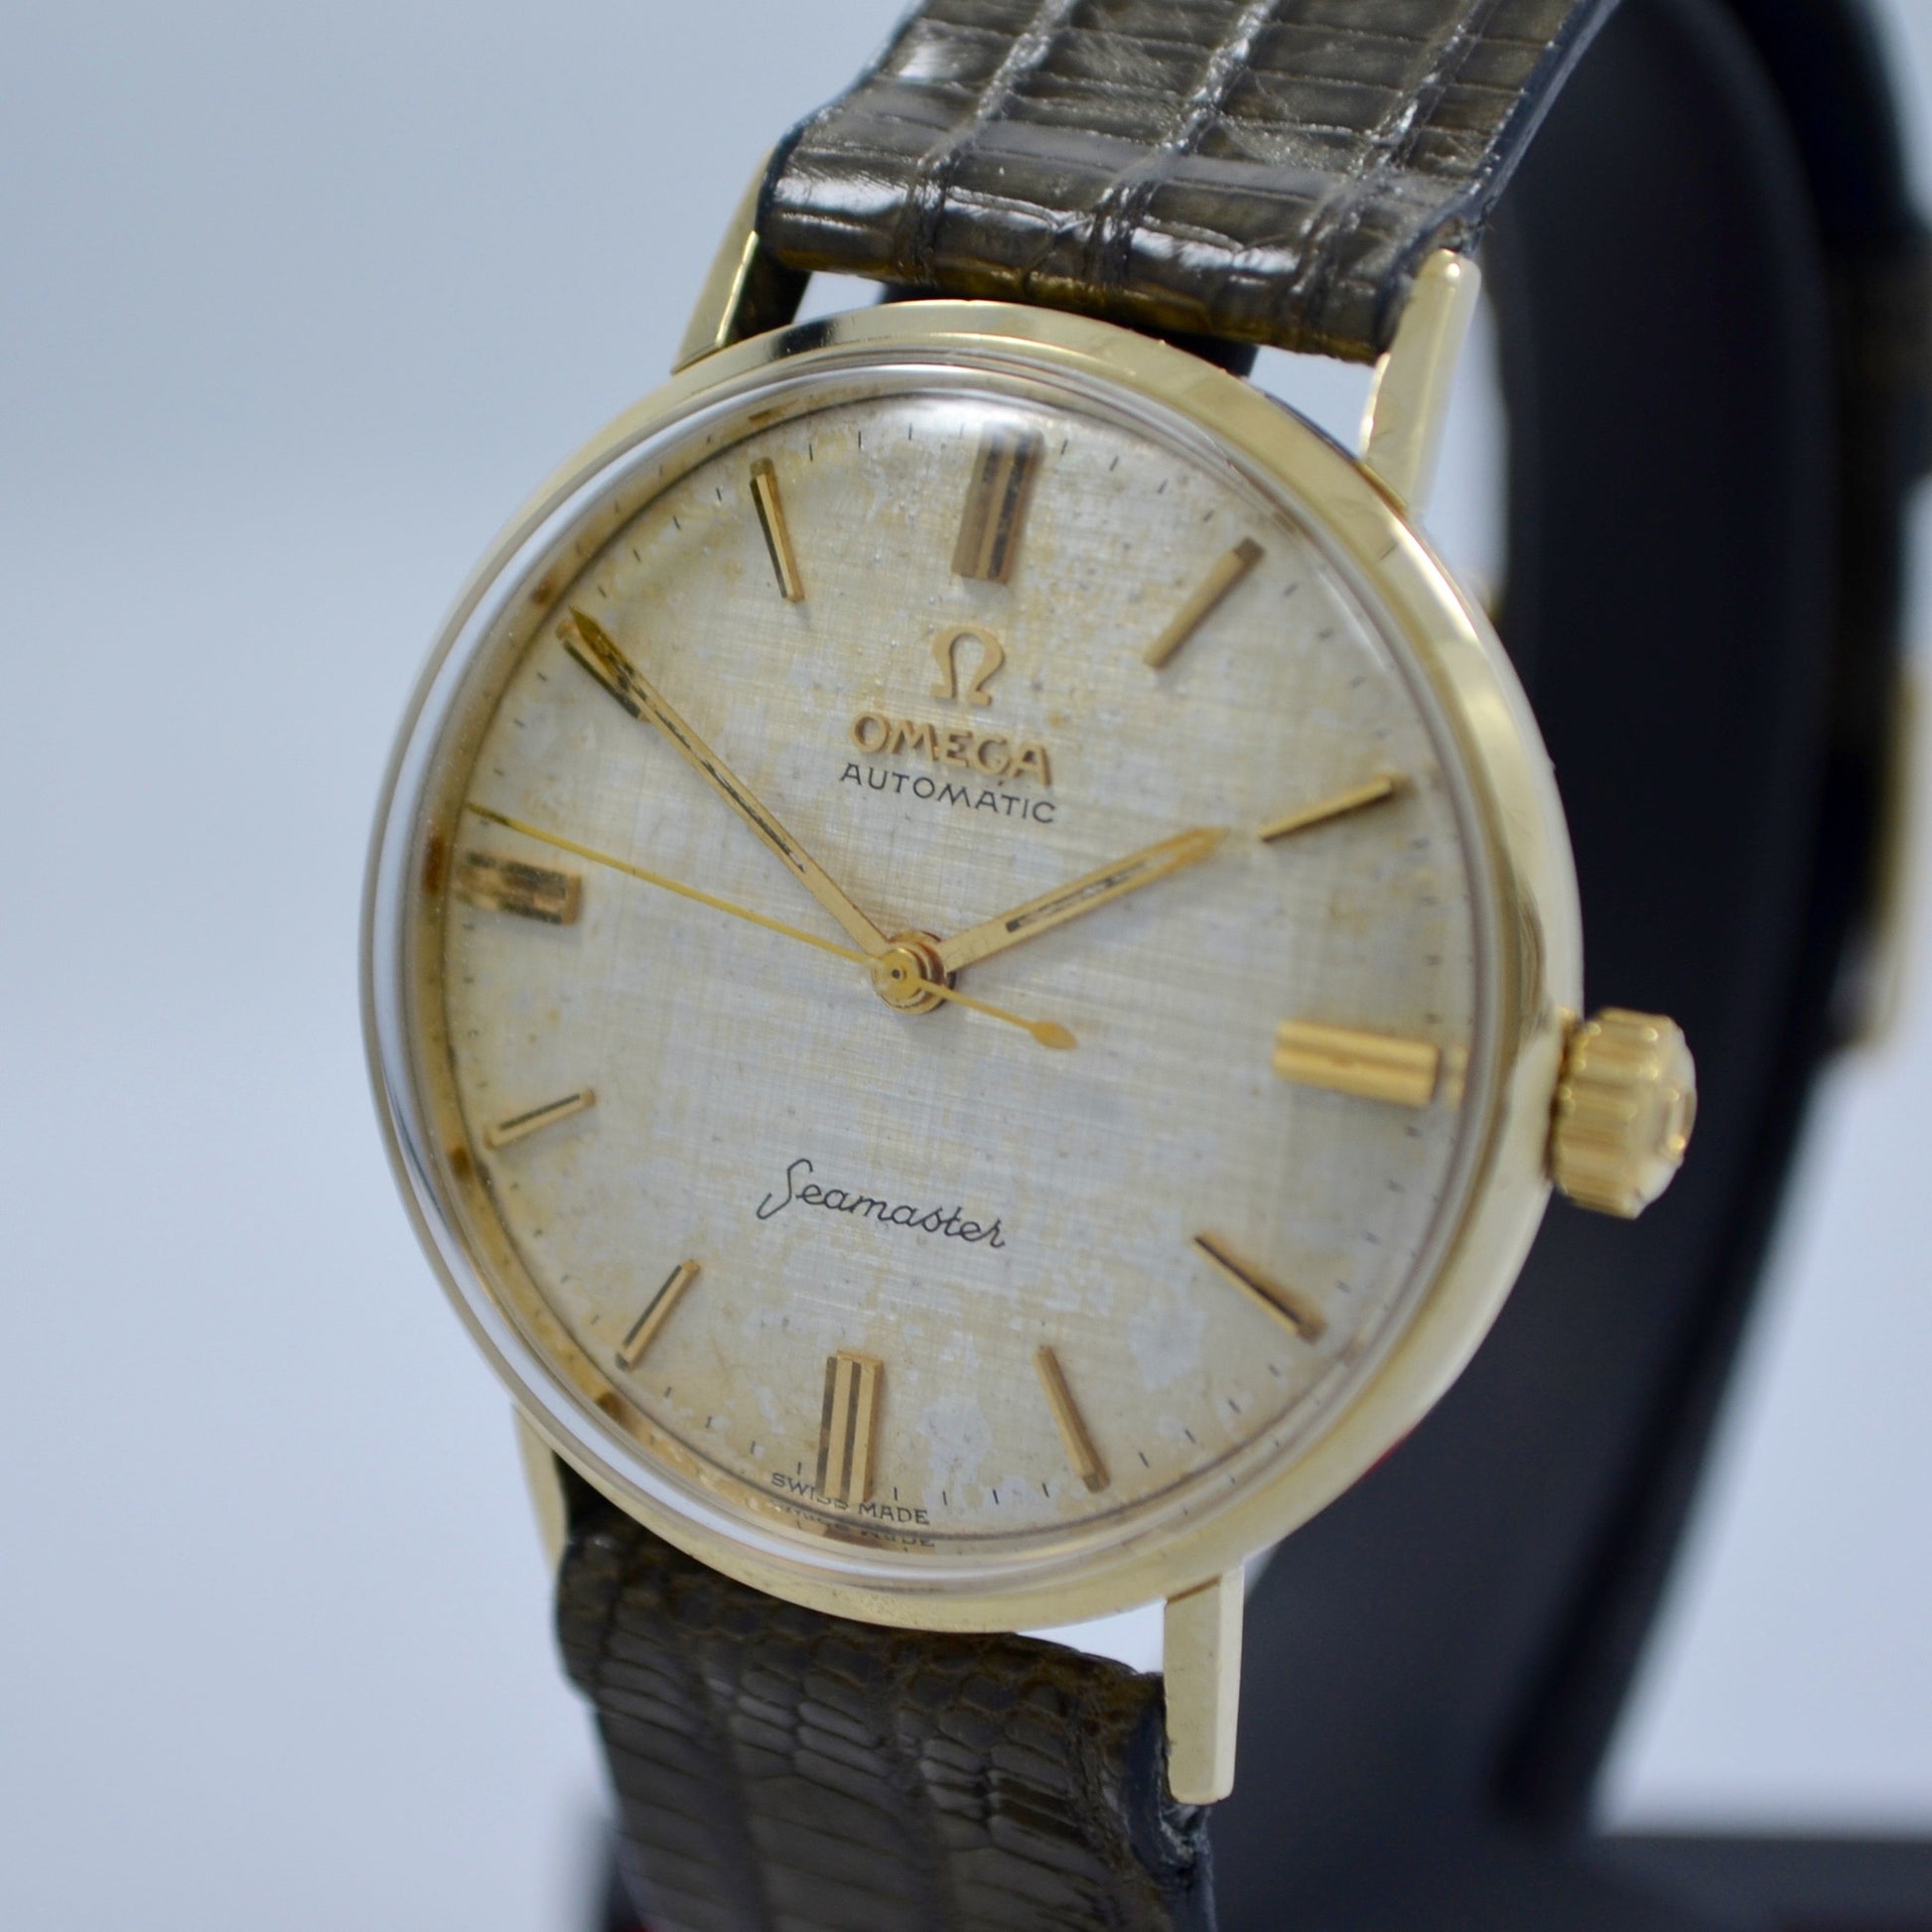 Vintage Omega Seamaster 6590-1 14K Solid Yellow Gold Cal. 550 Automatic Watch - Hashtag Watch Company